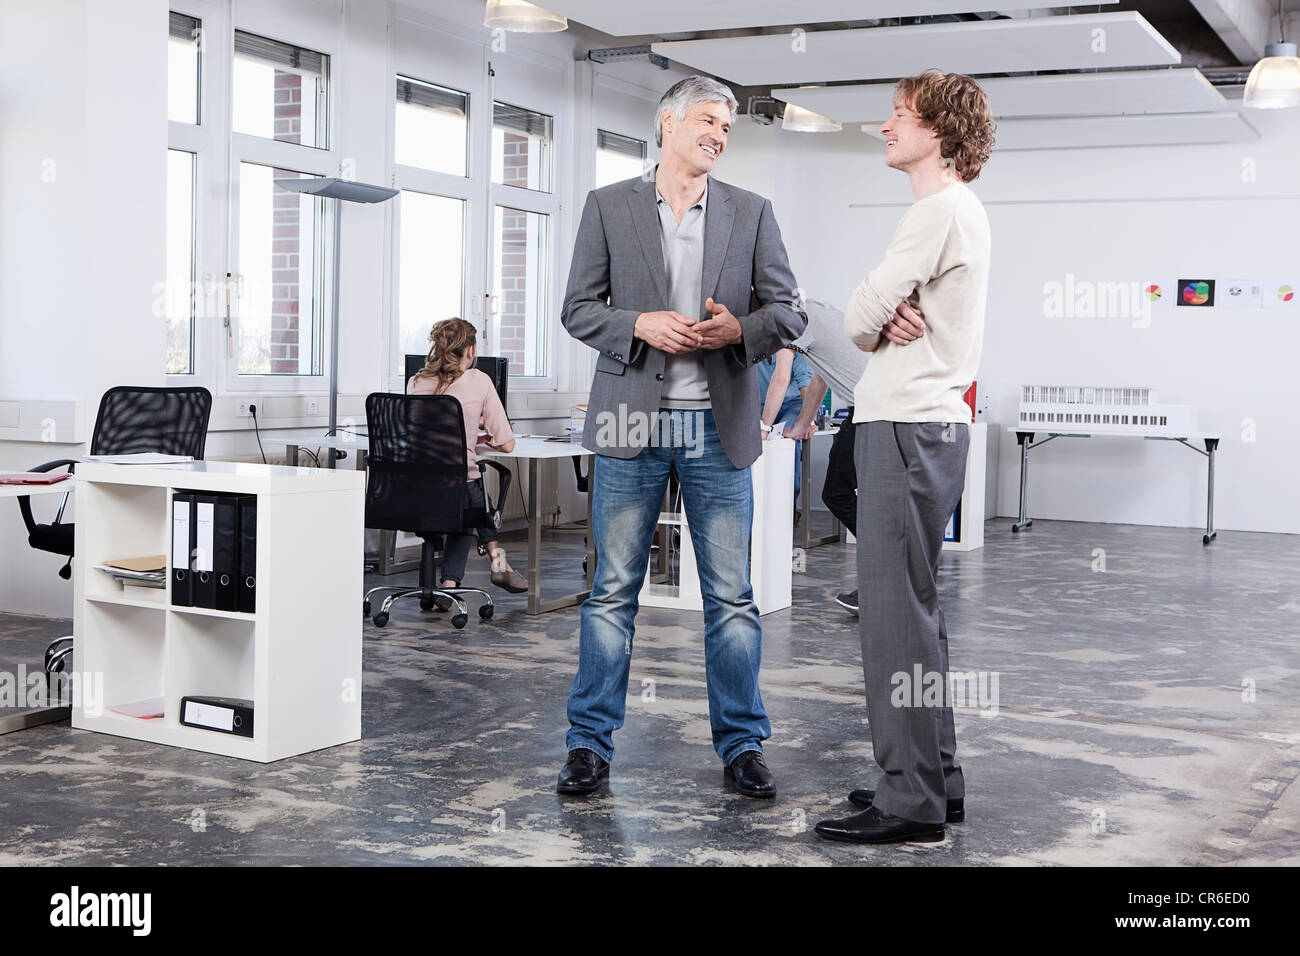 Germany, Bavaria, Munich, Men discussing, colleagues in background Stock Photo